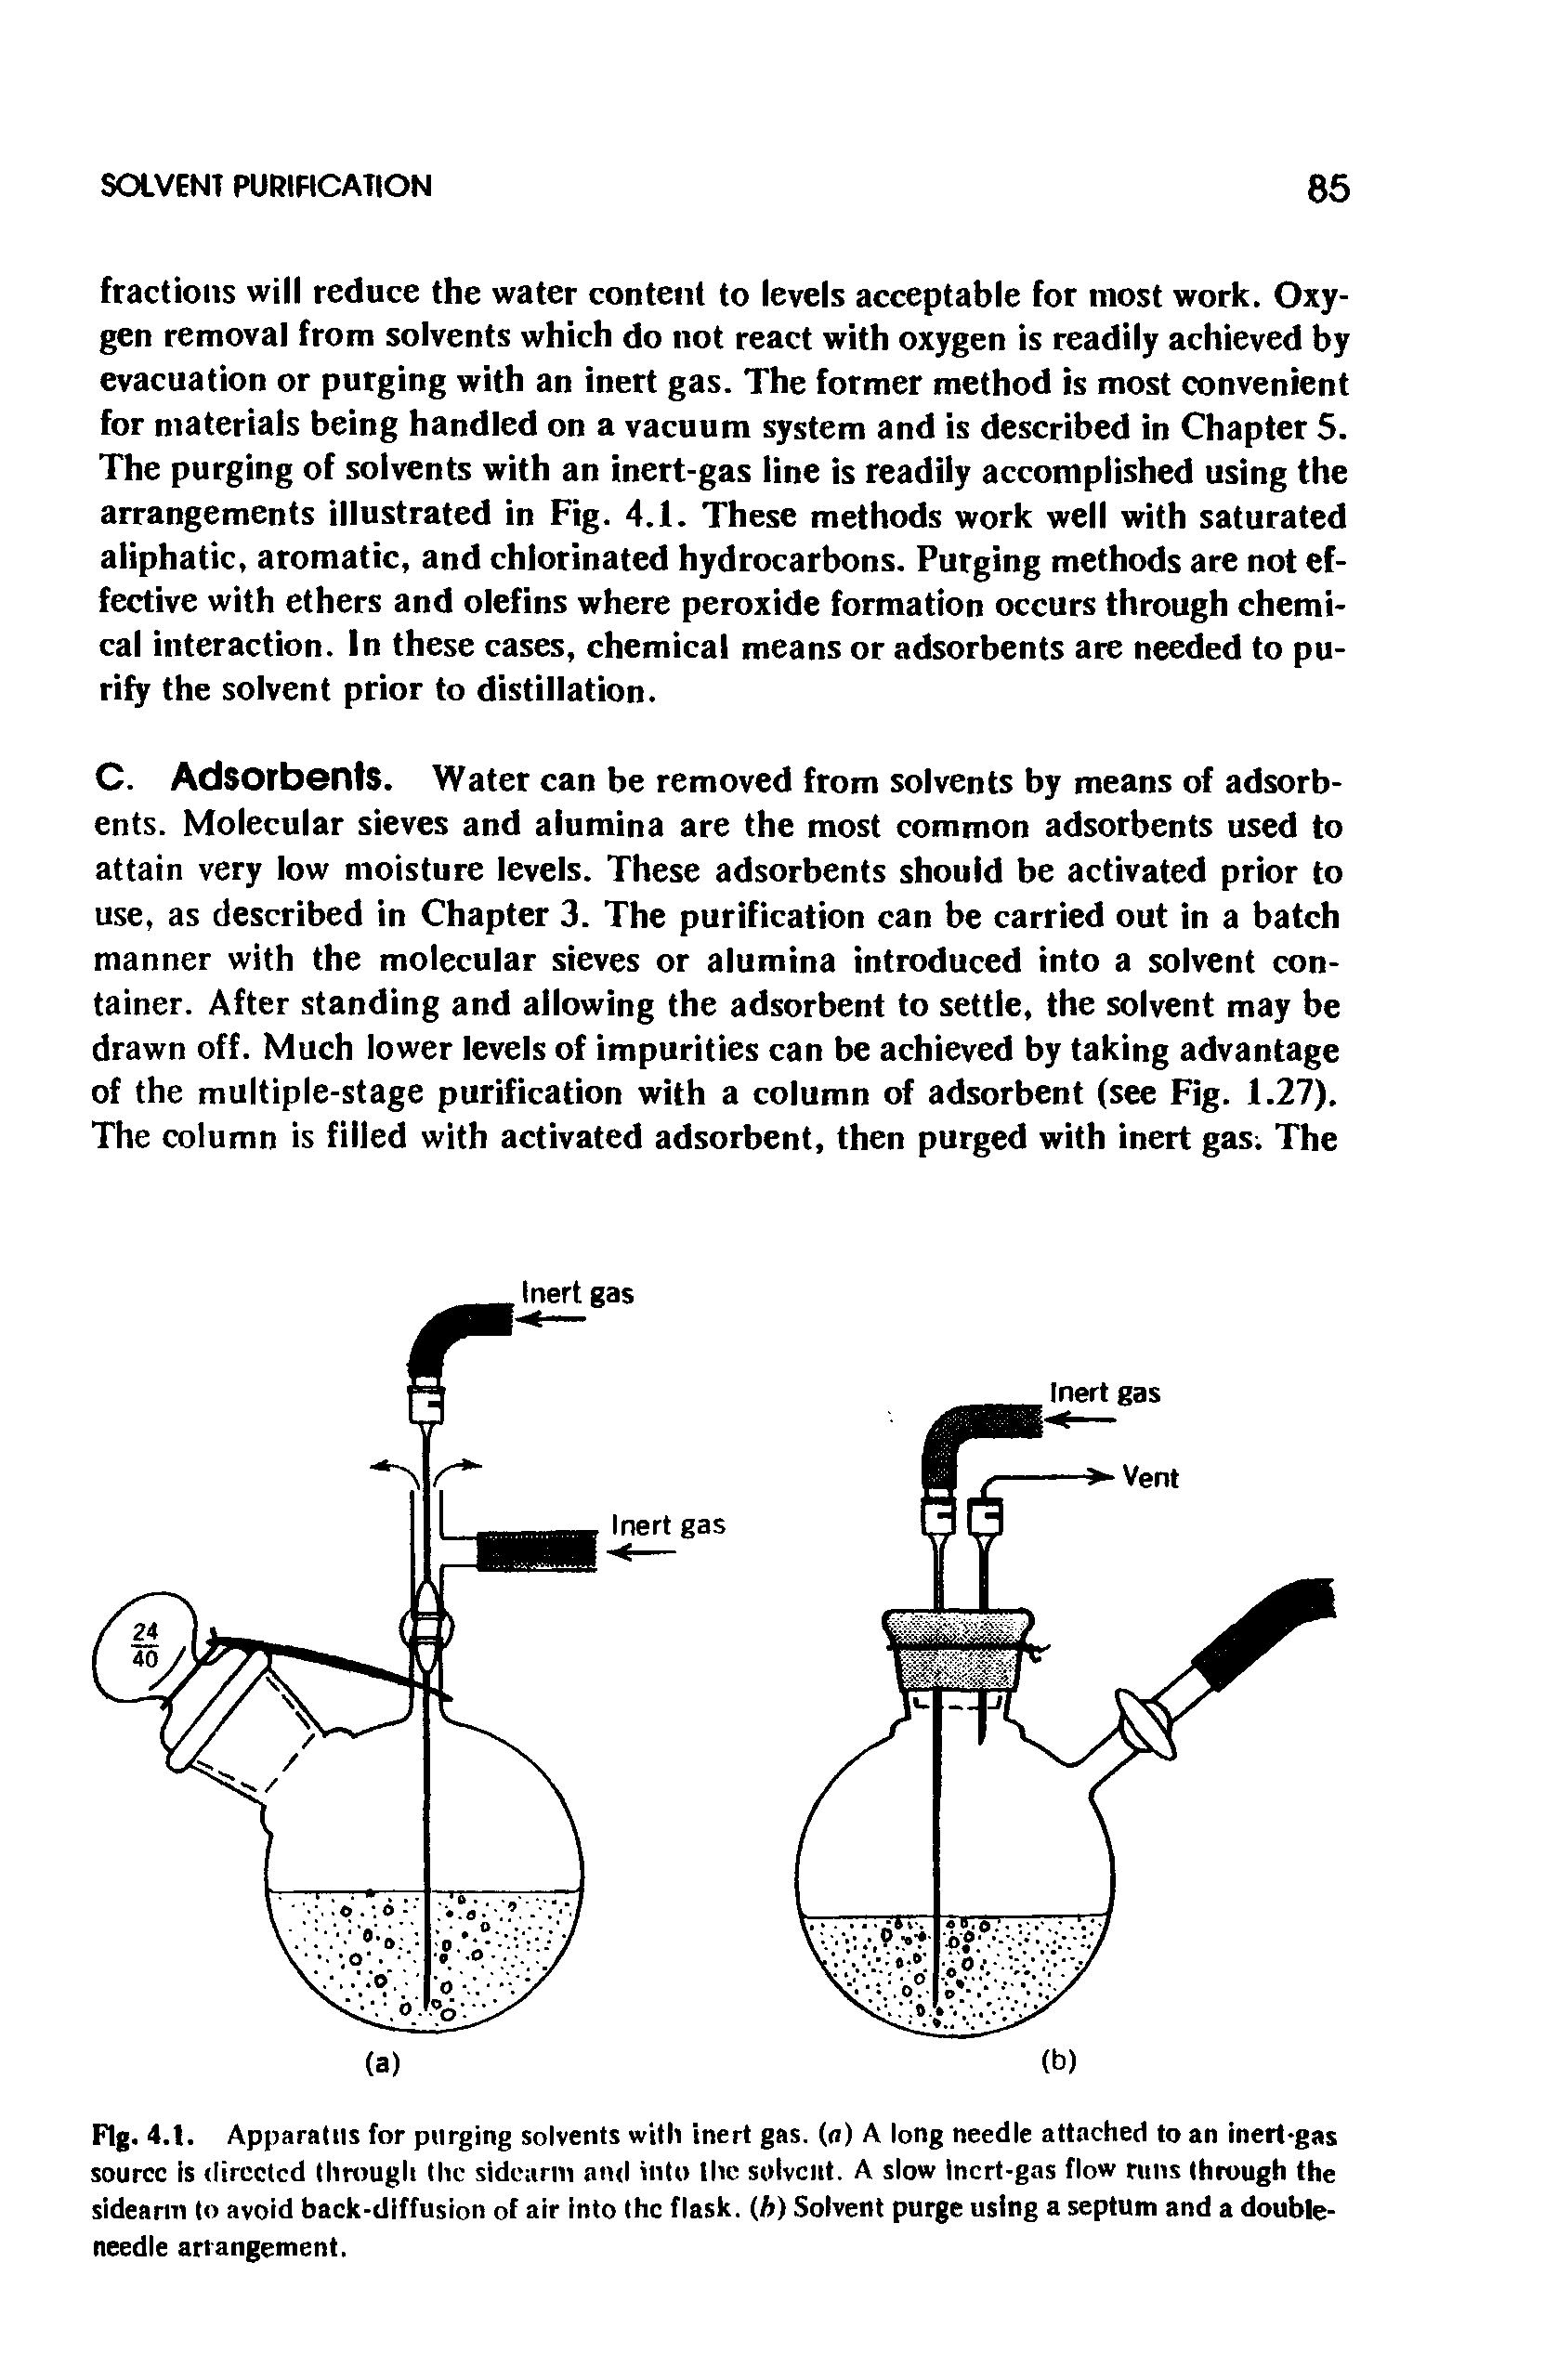 Fig. 4.1. Apparatus for purging solvents with inert gas. (n) A long needle attached to an inert-gas source is directed through the sidearm and into the solvent. A slow inert-gas flow runs through the sidearm to avoid back-diffusion of air into the flask. (b) Solvent purge using a septum and a doubleneedle arrangement.